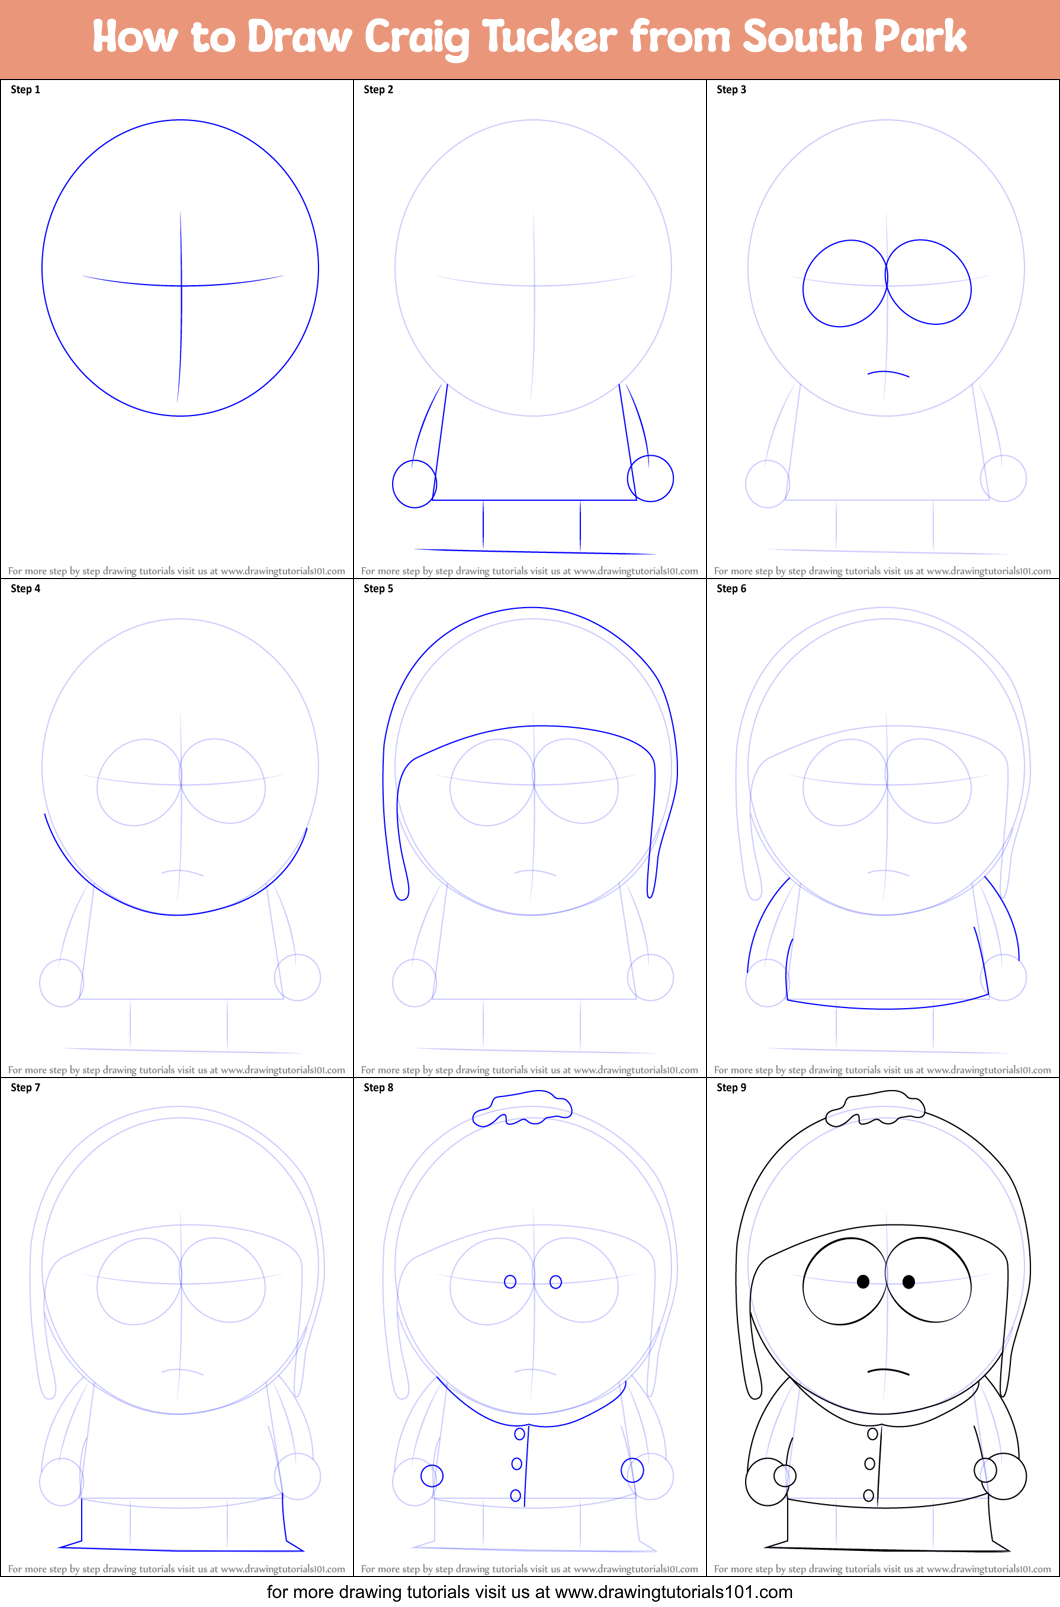 How to Draw Craig Tucker from South Park printable step by step drawing